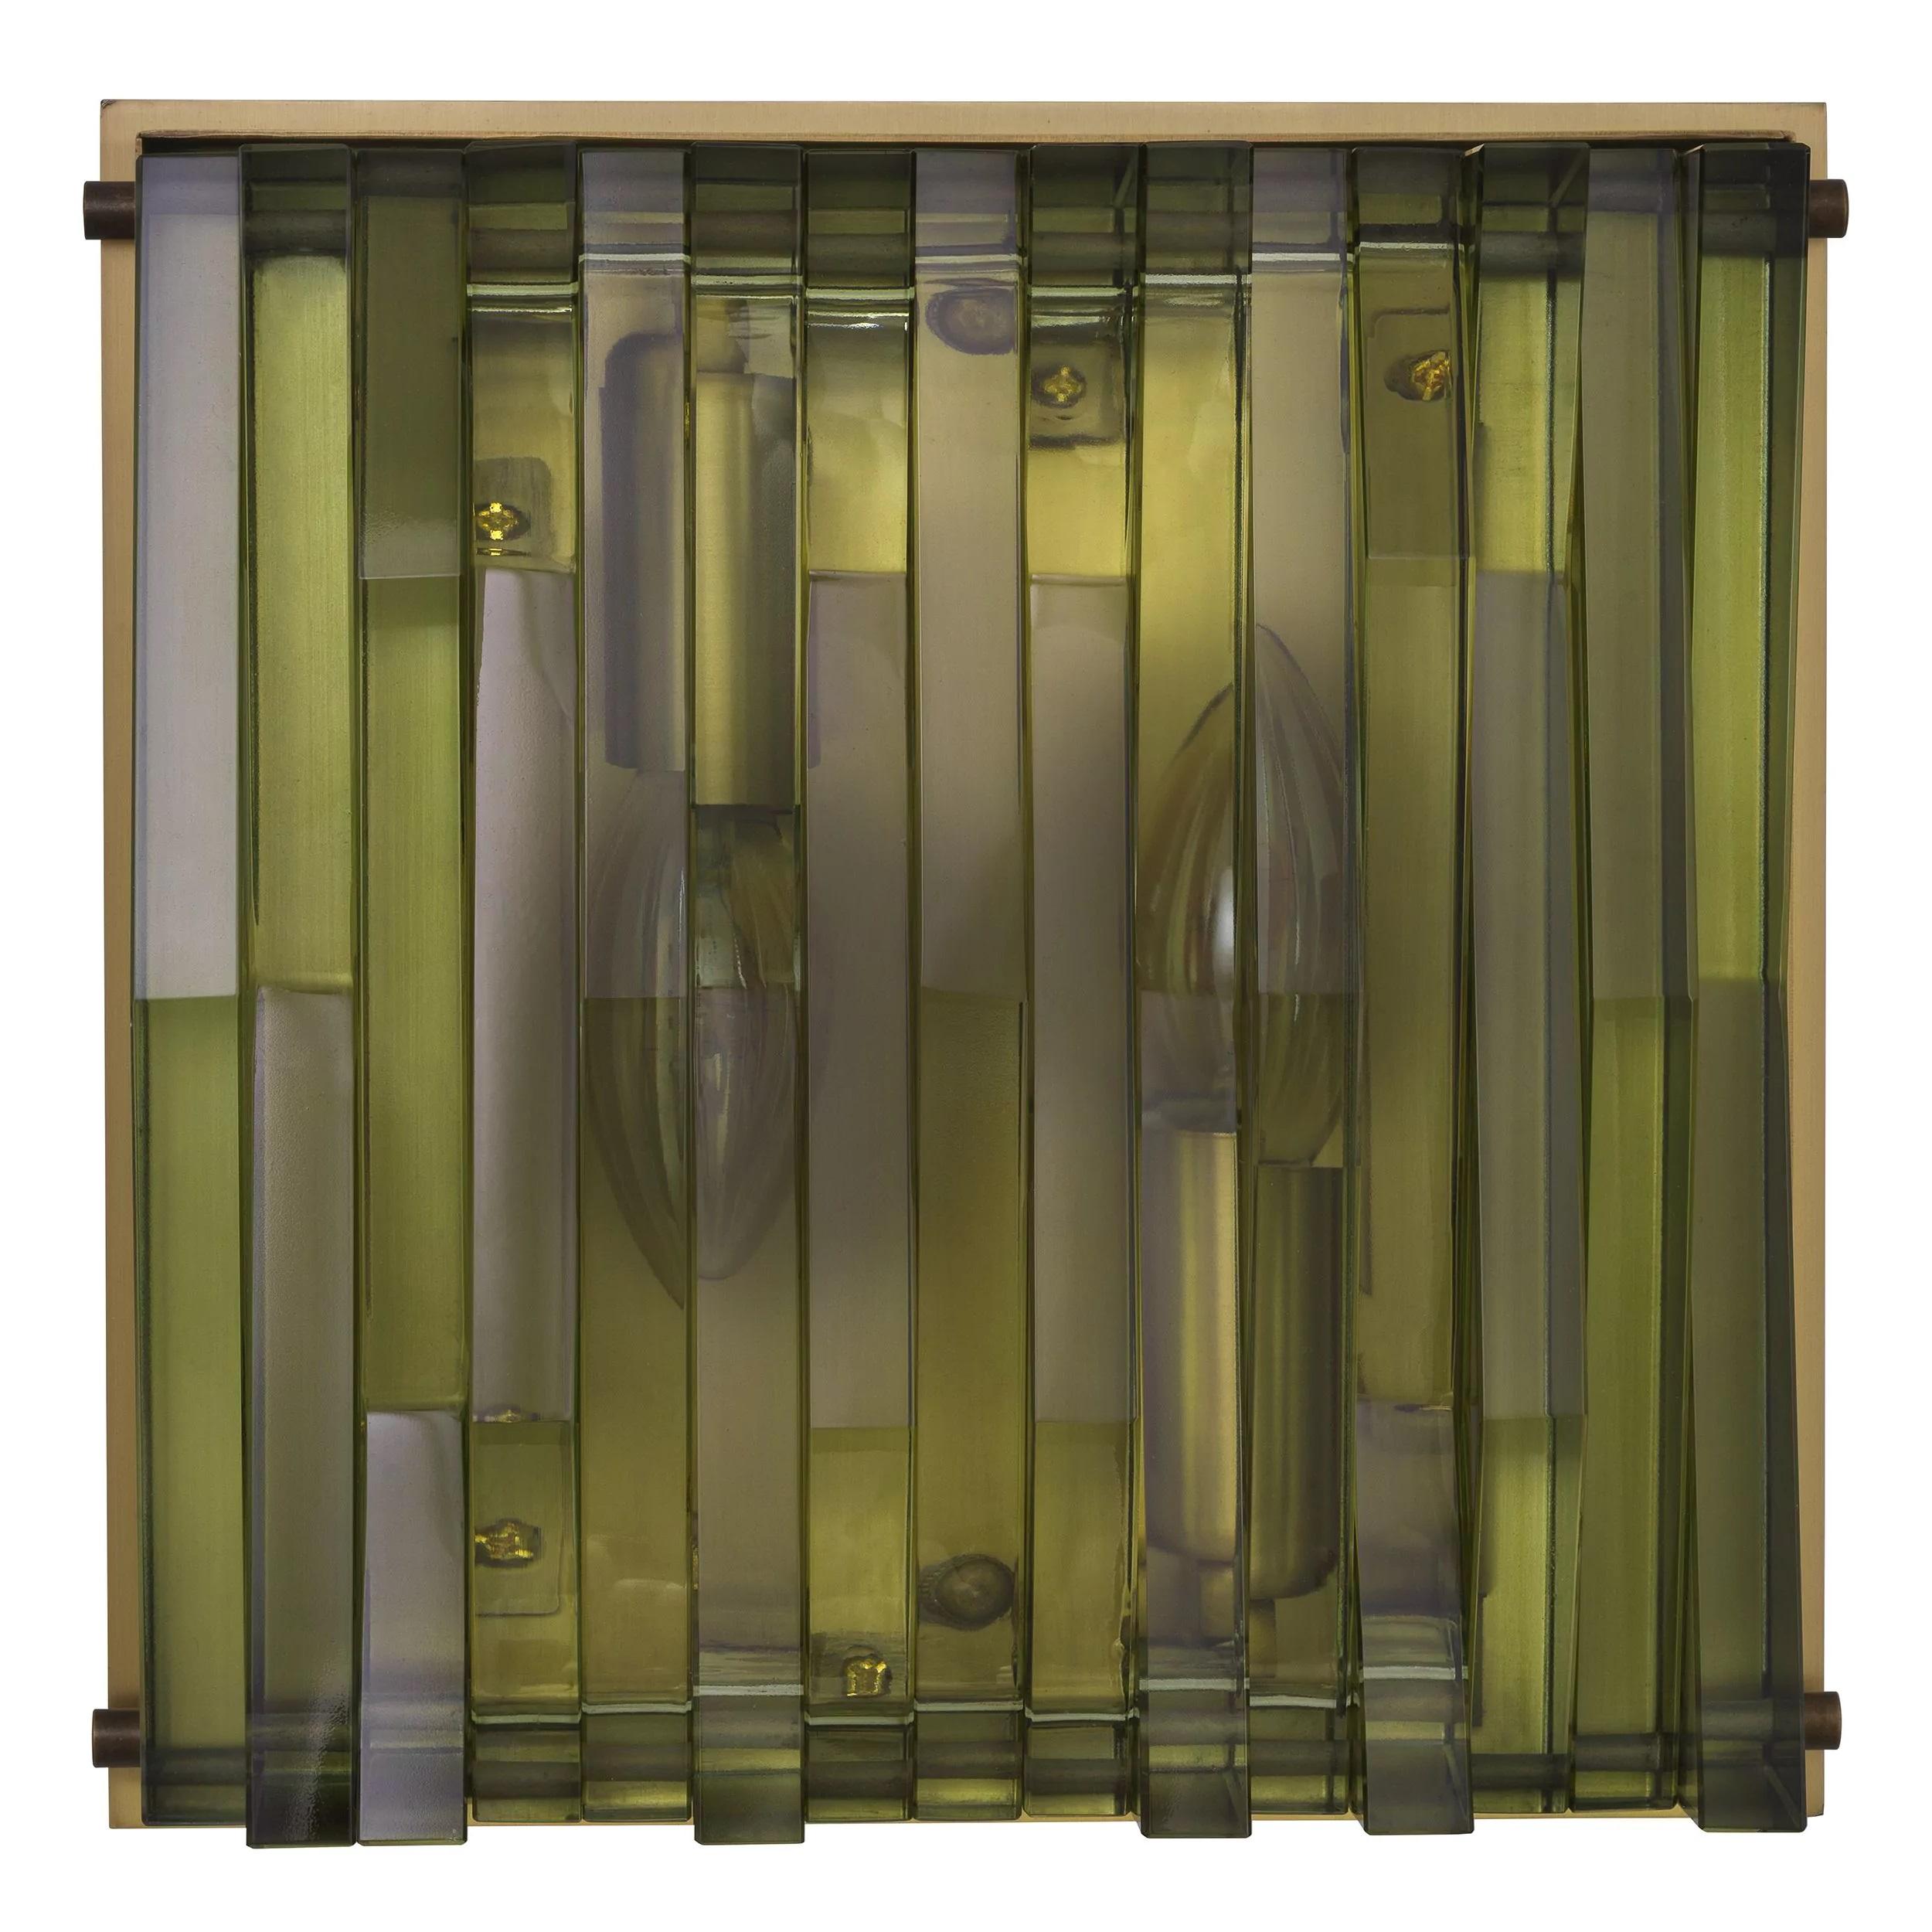 Contemporary 1960s-1970s Italian Design And Brutalist Style Brass and Glass Wall Light For Sale